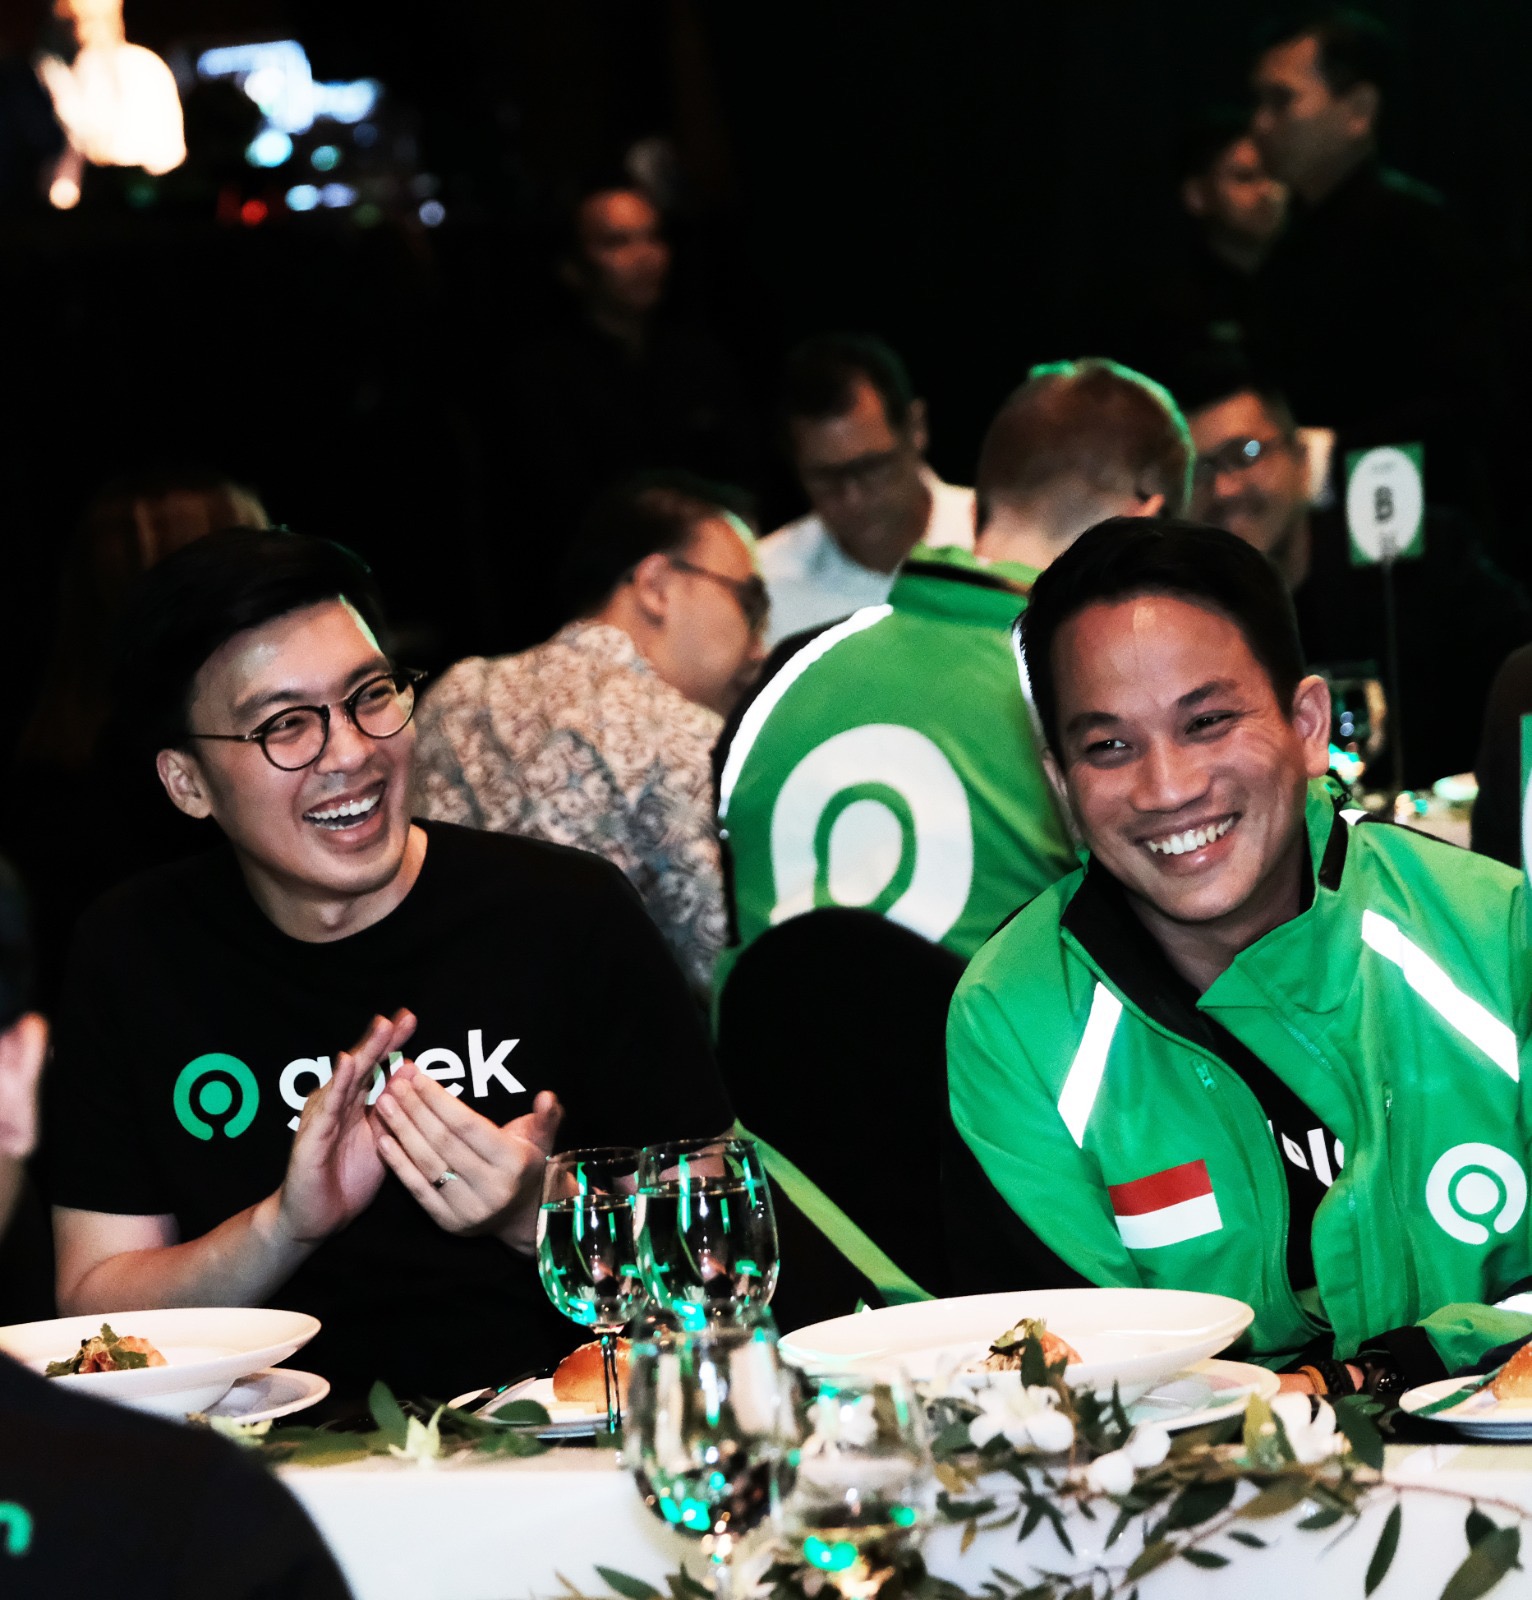 Gojek co-CEOs talk company strategy after Makarim’s departure (update)